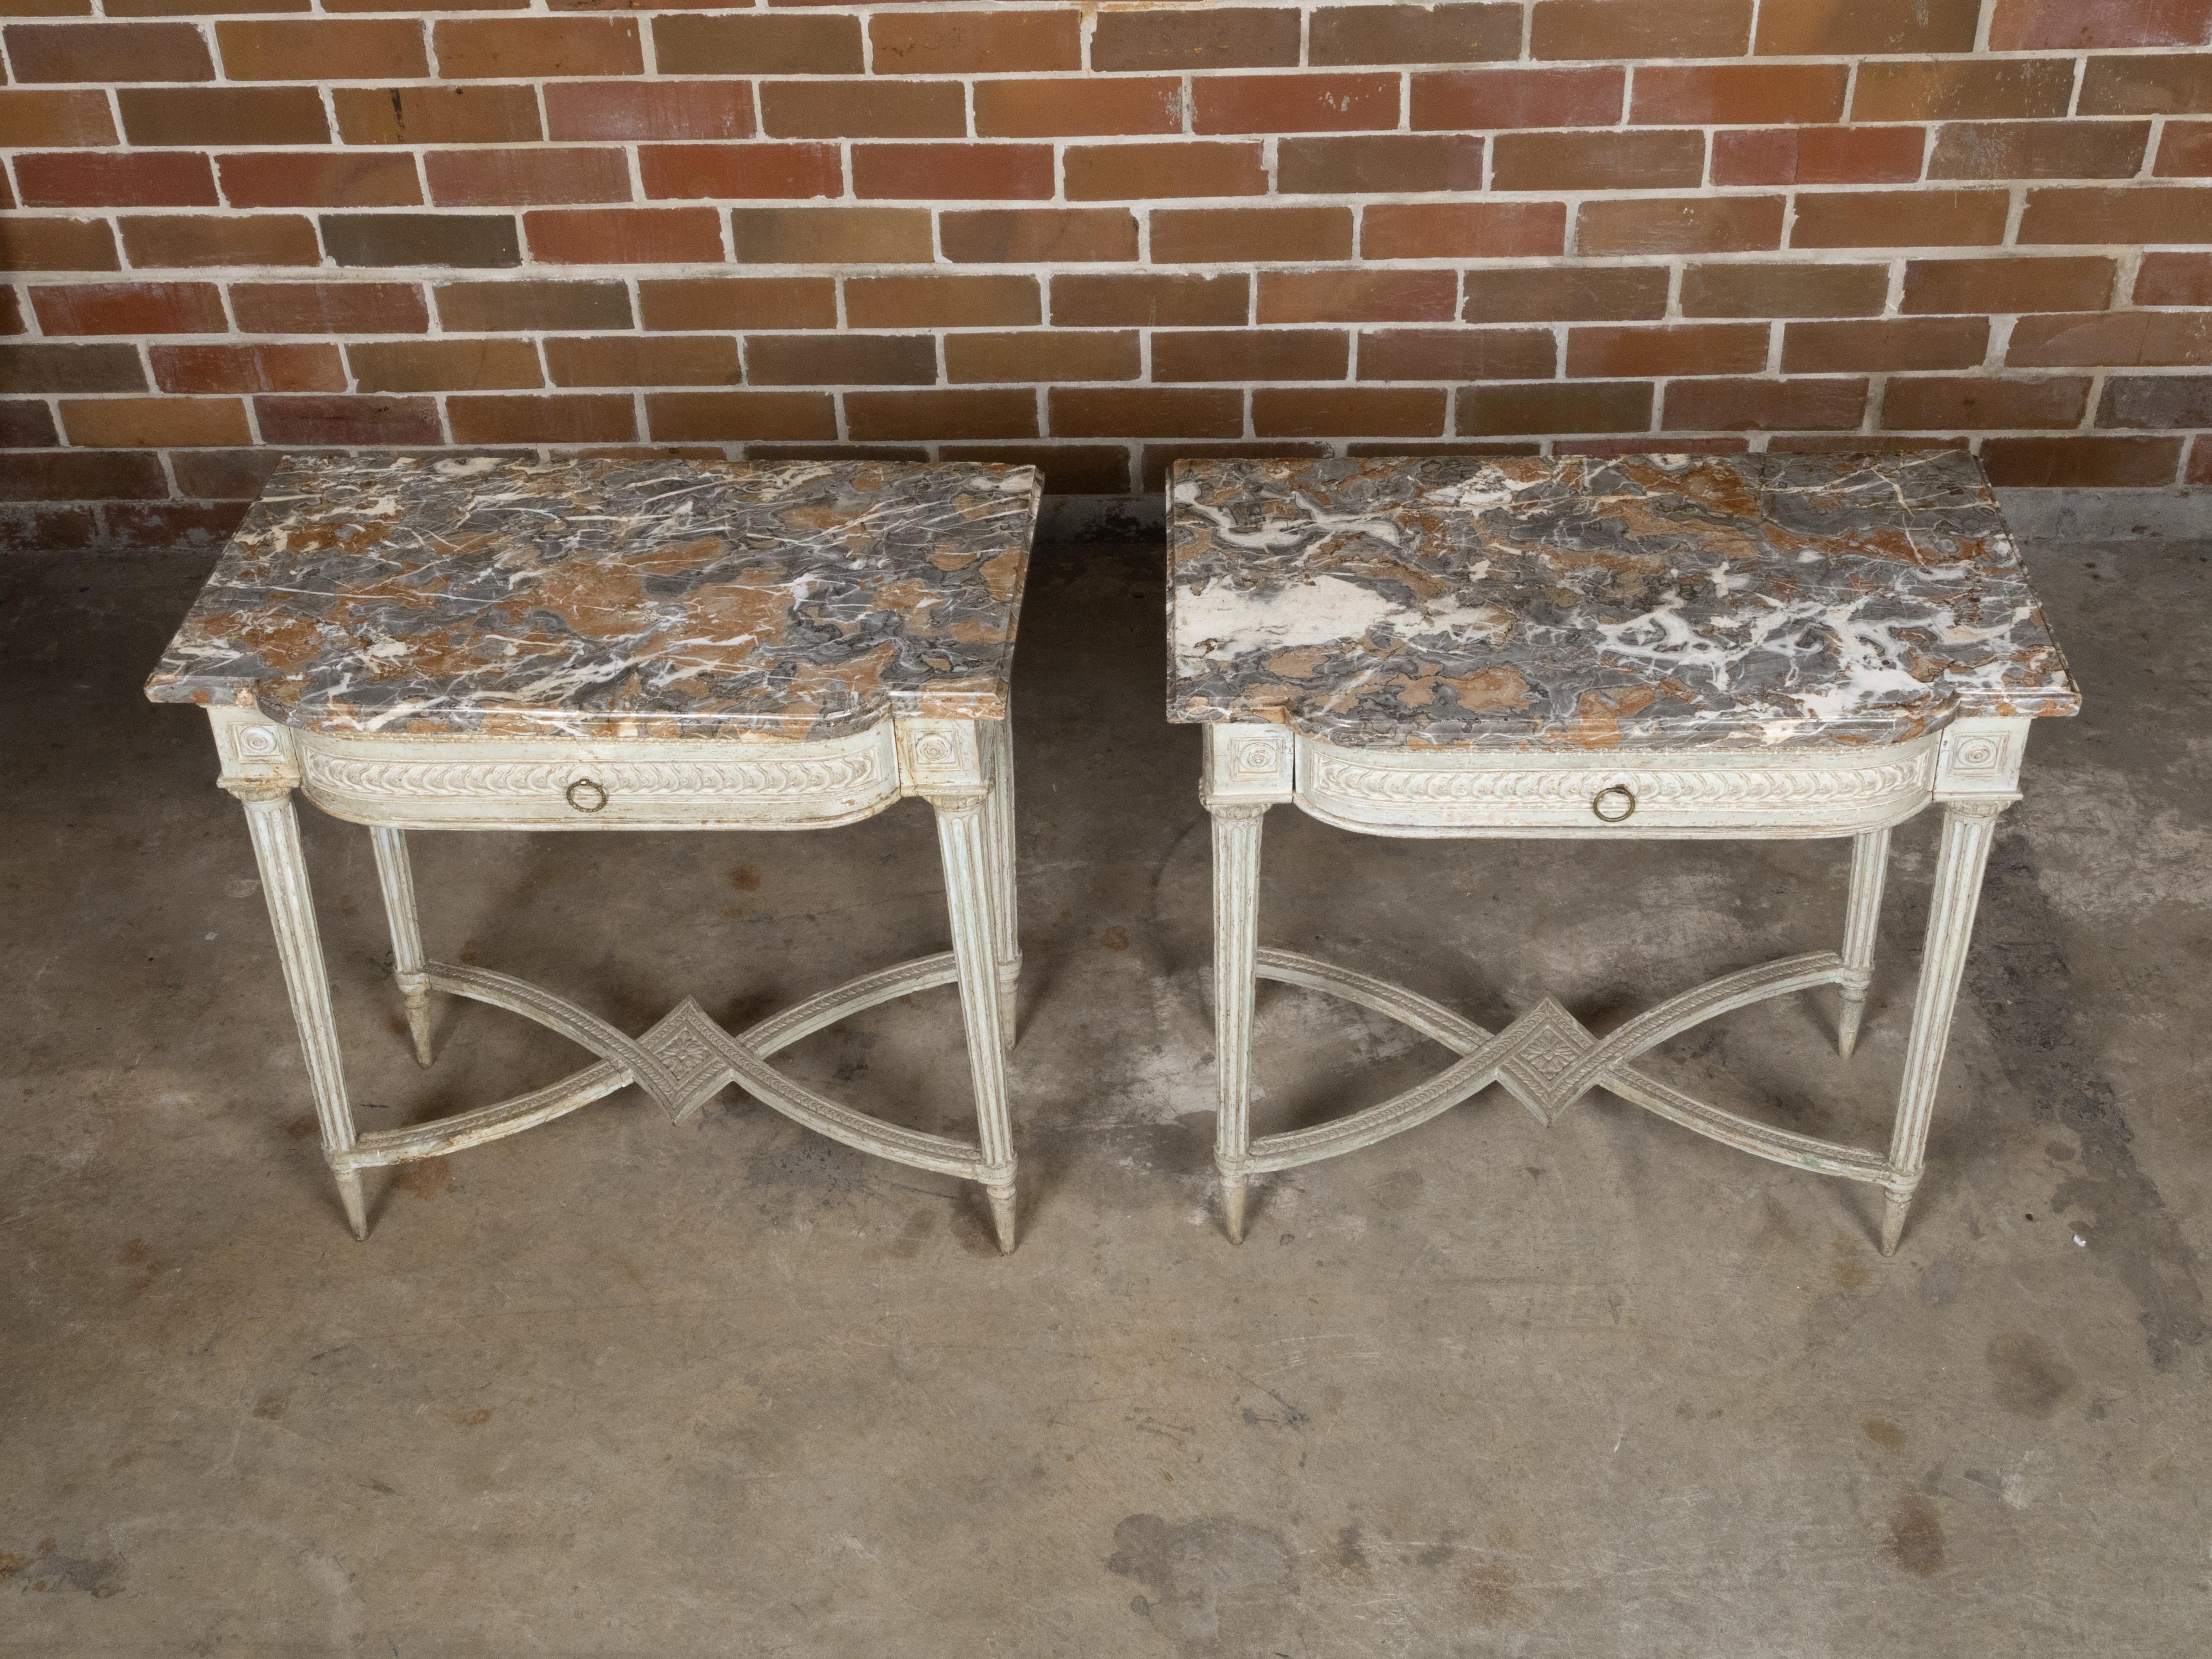 Pair of French Louis XVI 18th Century Painted Console Tables with Marble Tops For Sale 10